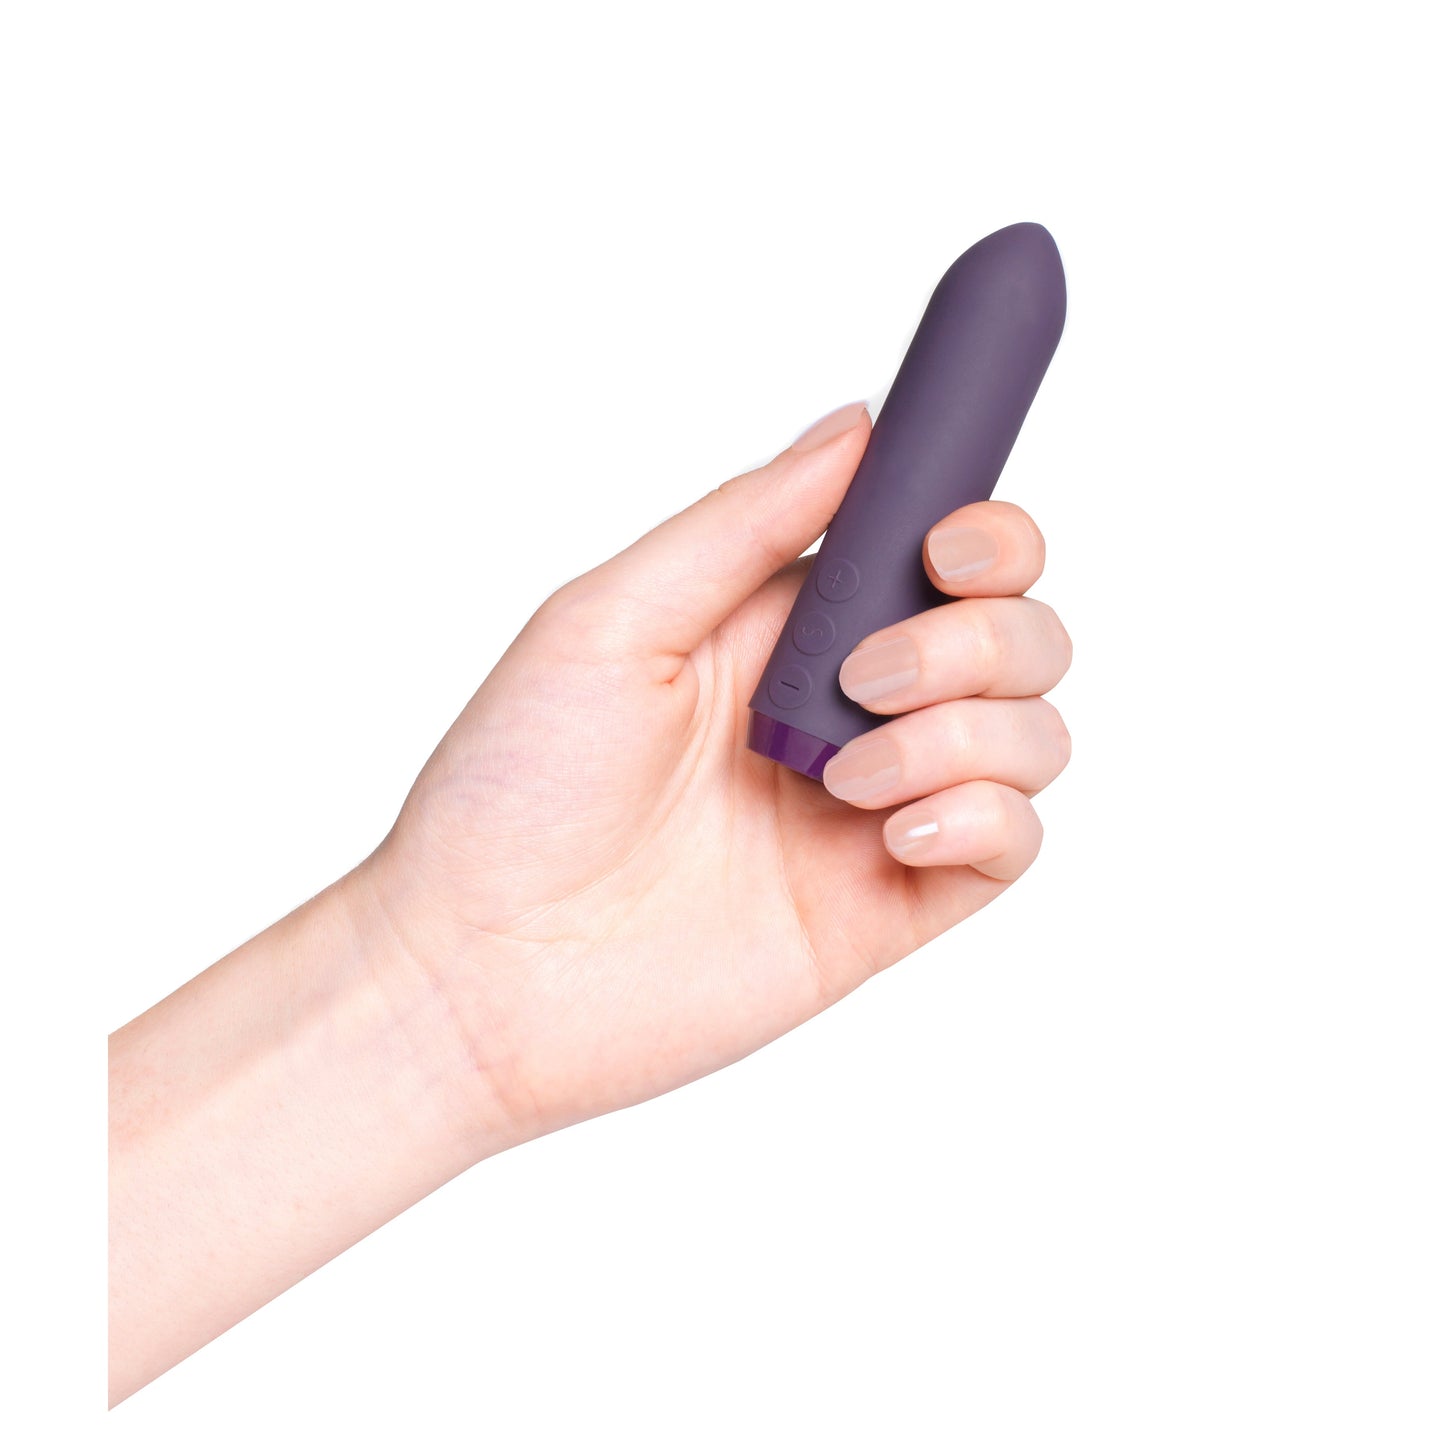 Classic Bullet Vibrator - Soft Silicone Tip for Pinpoint Precision